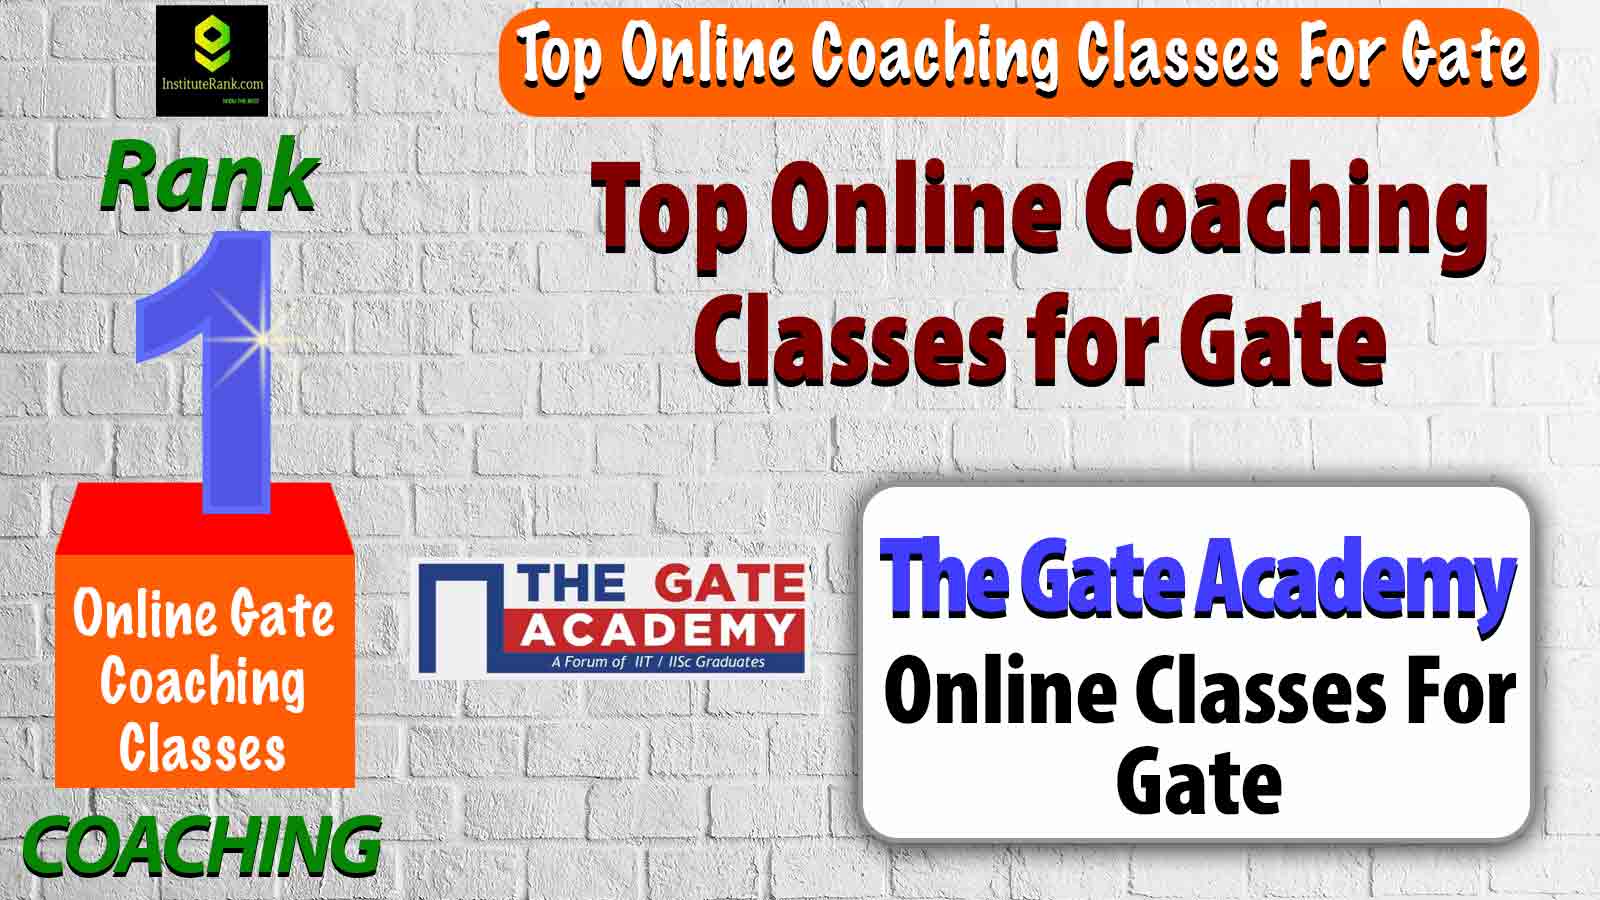 Top Online Coaching Classes for Gate